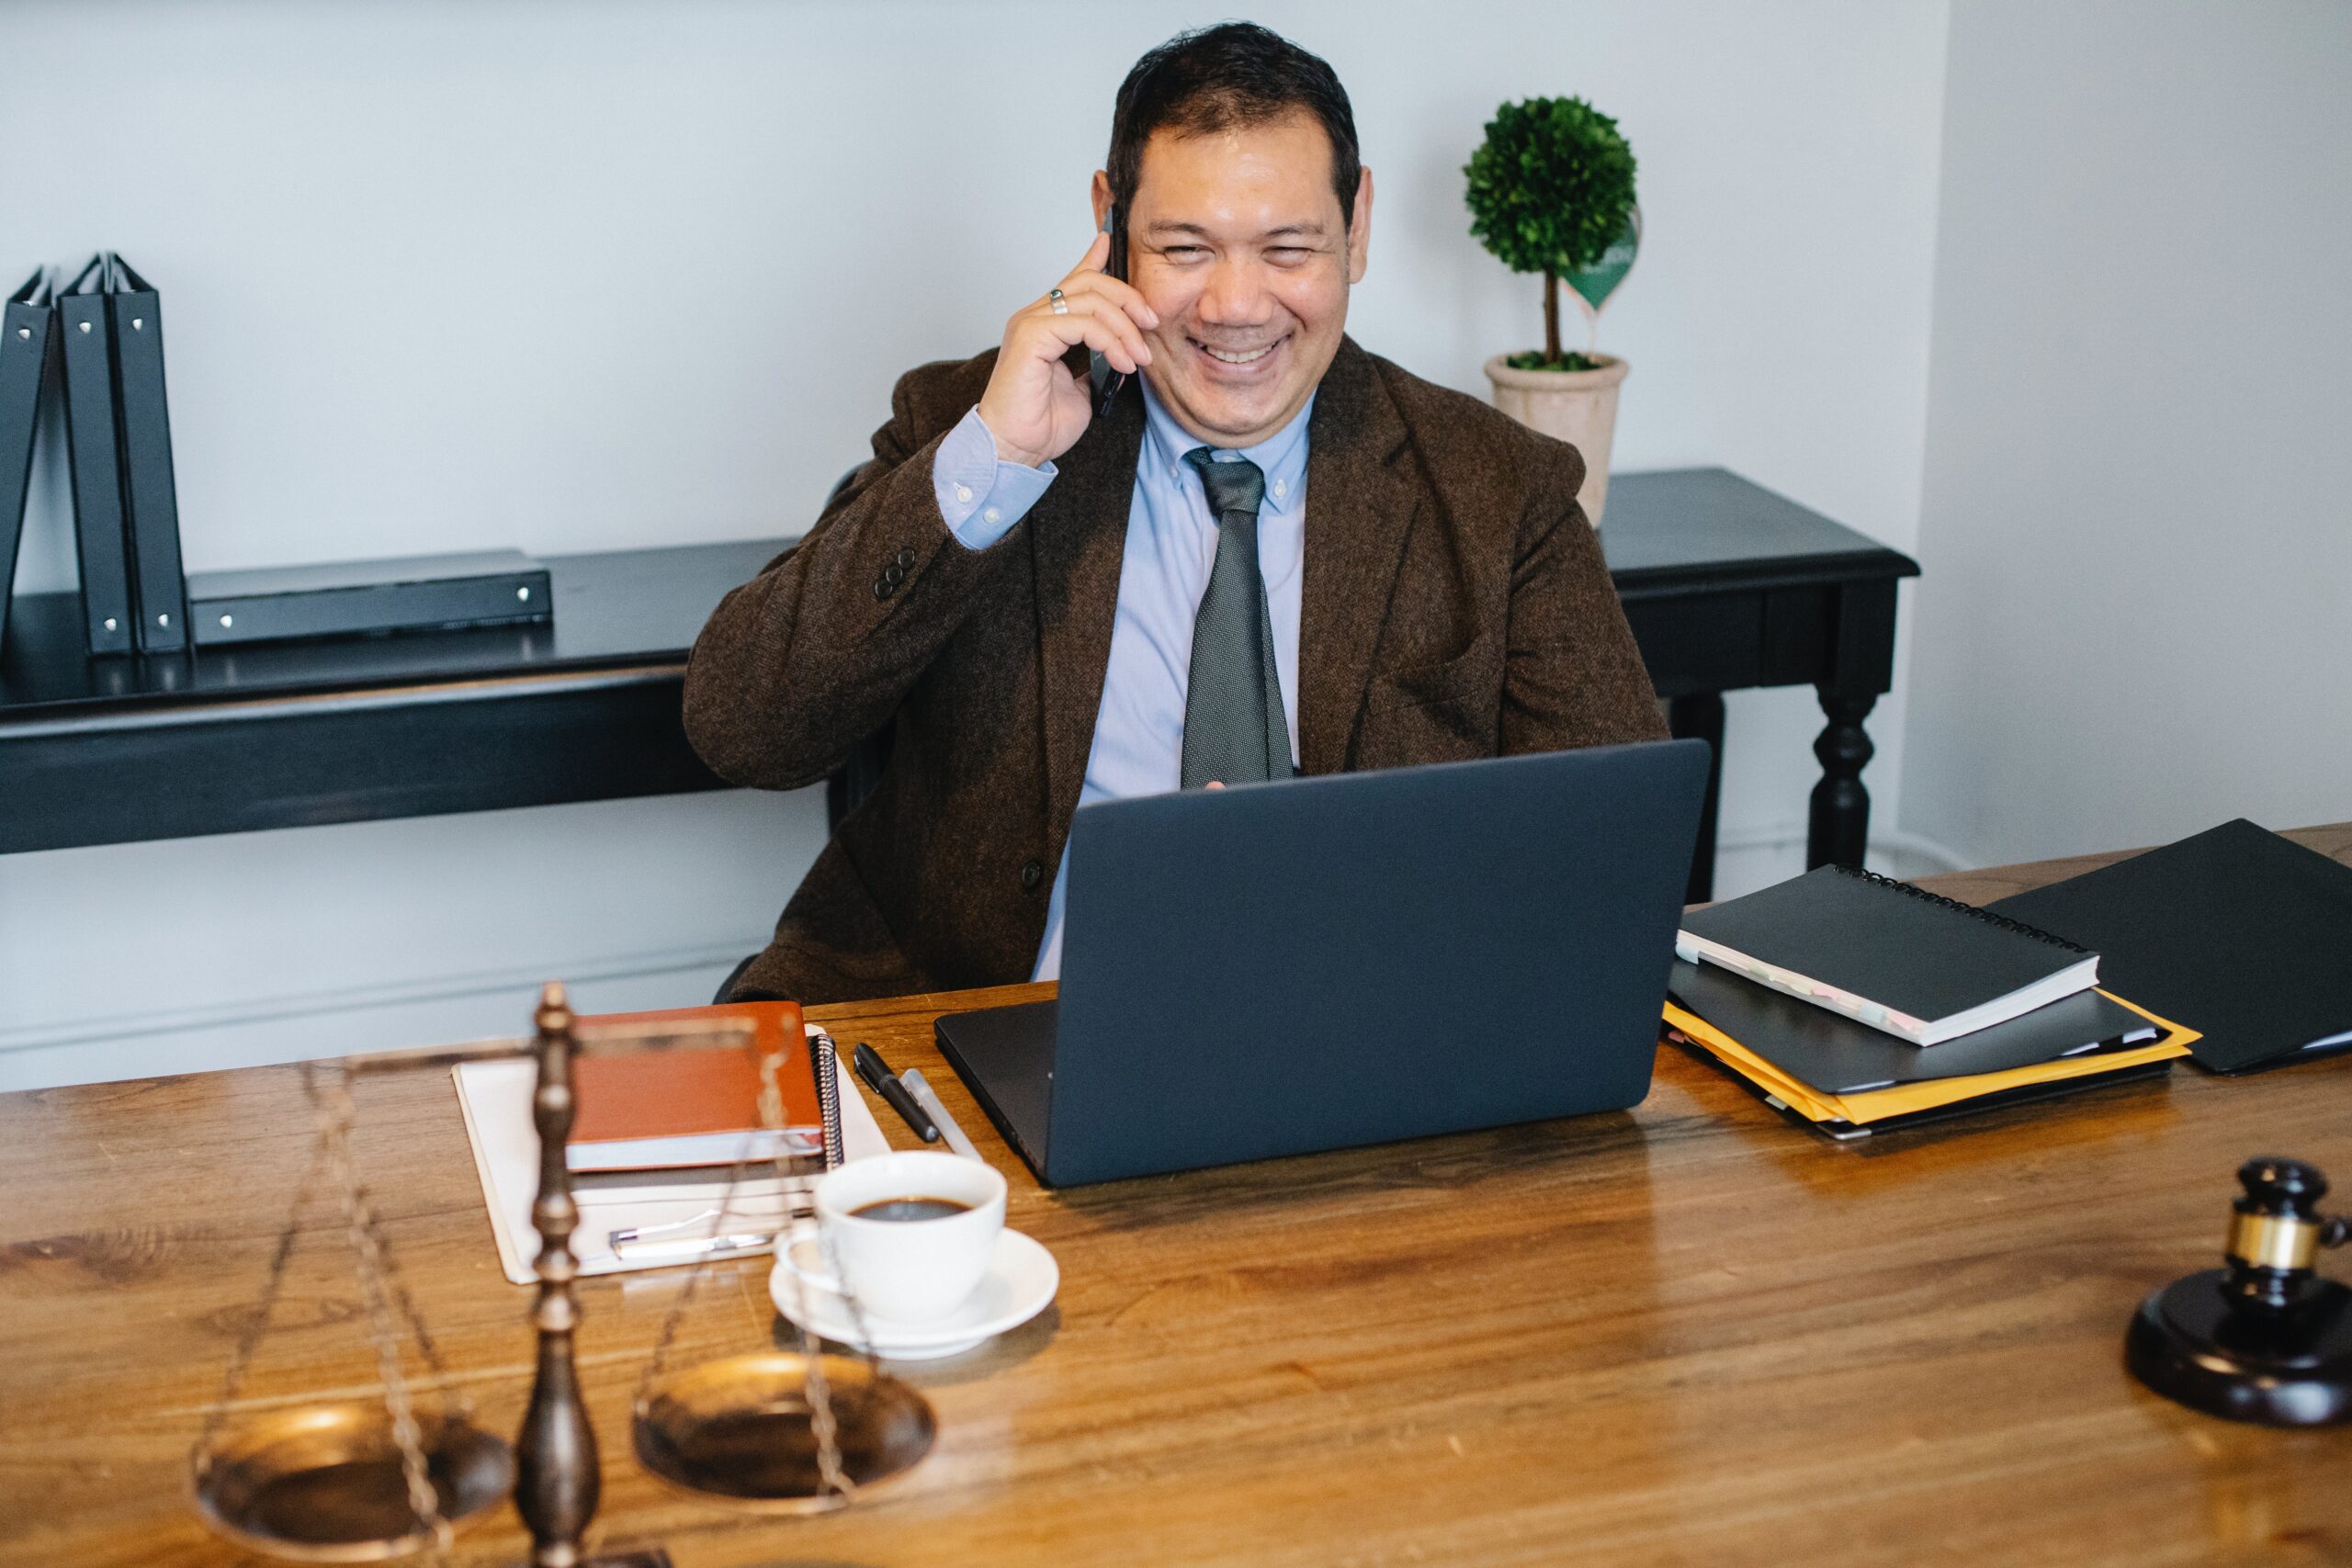 Man happily speaking on the phone in front of his laptop